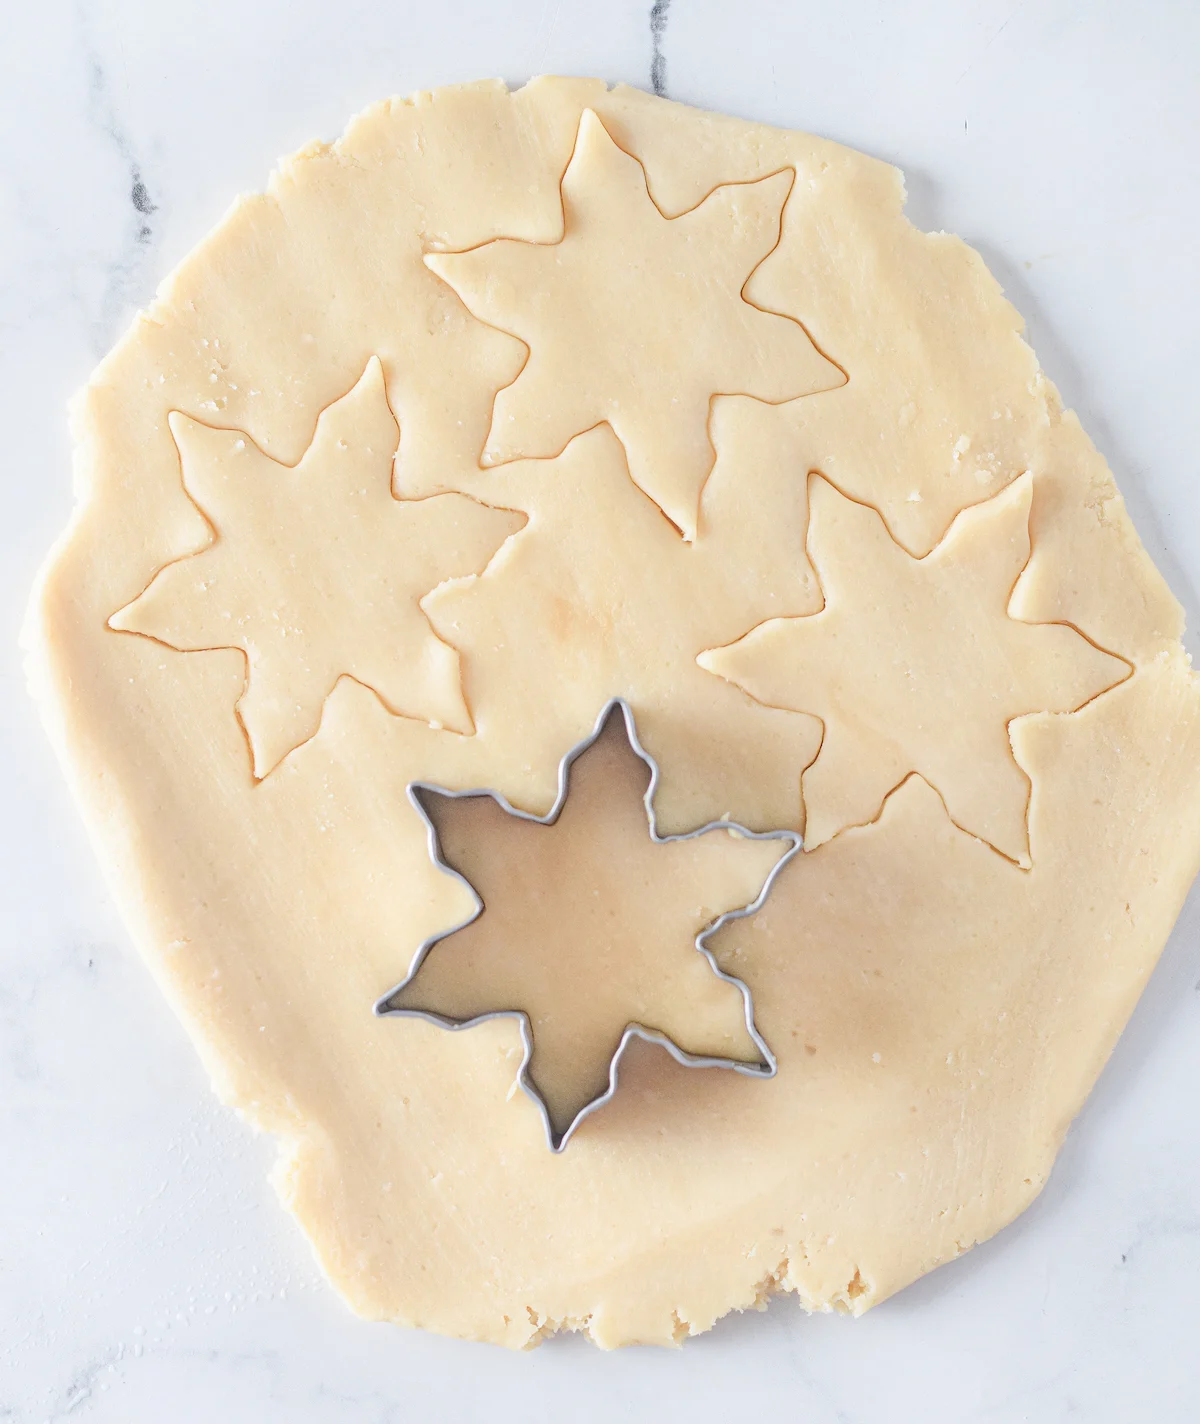 cutting star shapes out of cookie dough